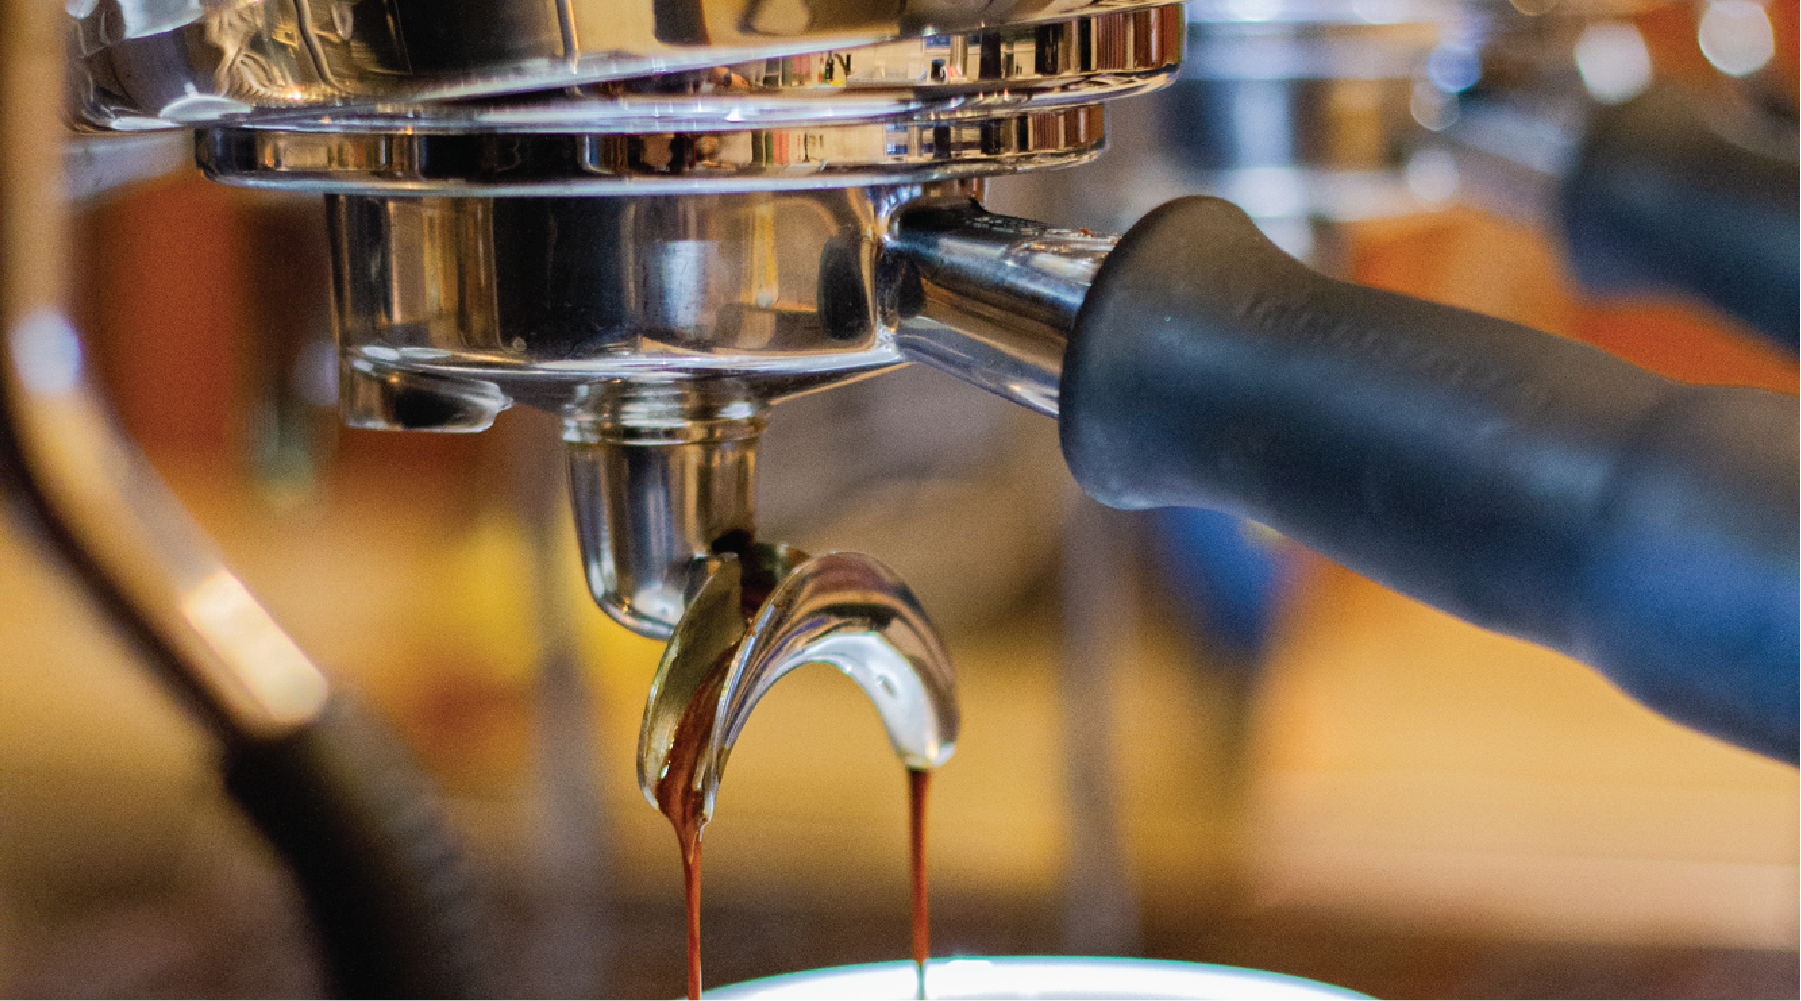 Coffee extracting and pouring out from a commercial coffee machine at Rumble Coffee Roasters